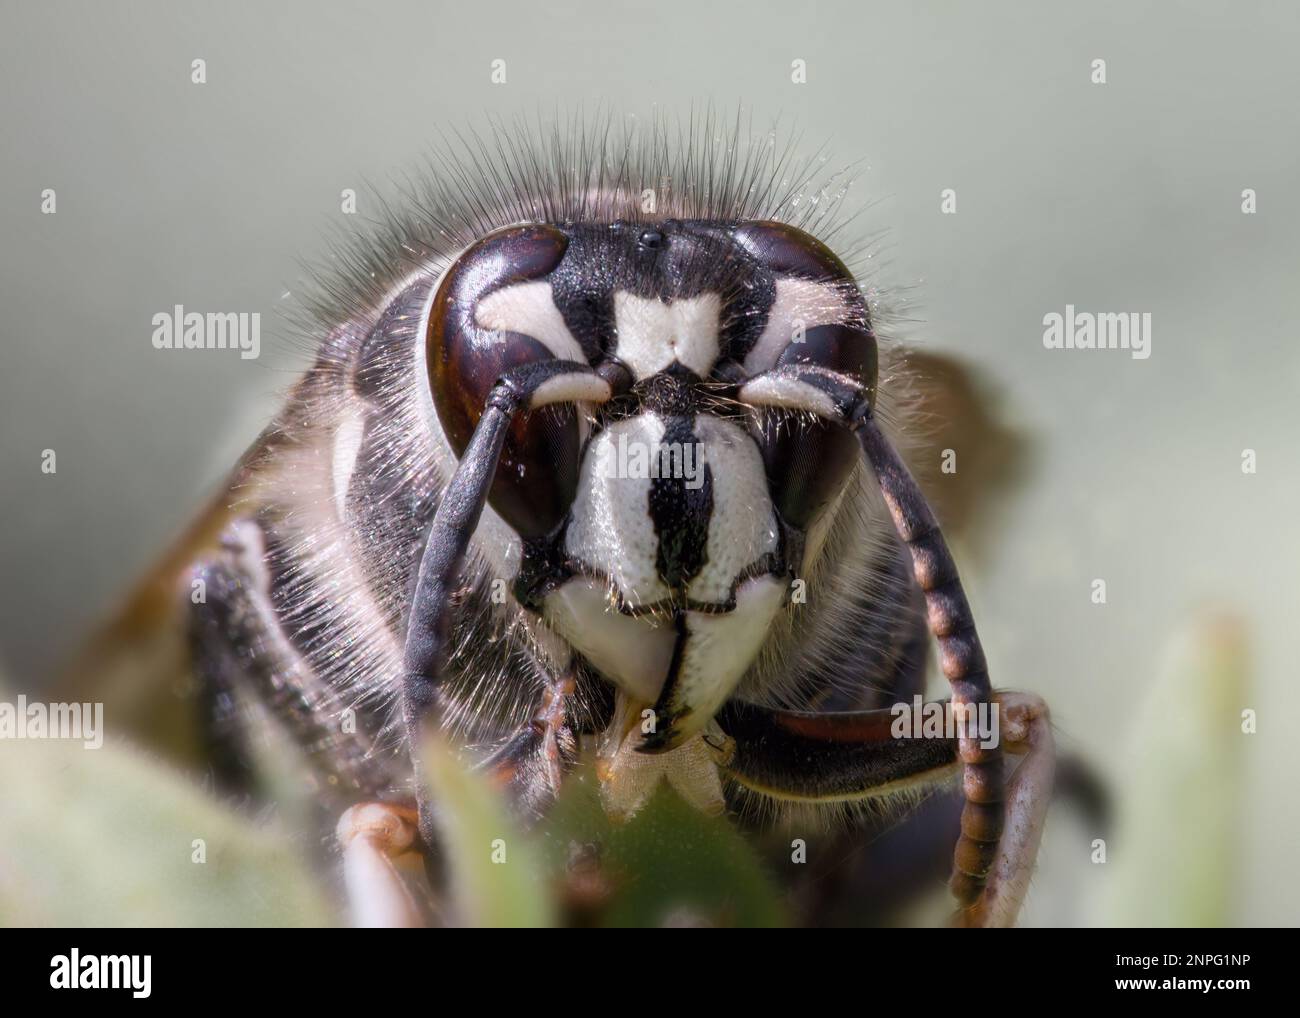 Extreme closeup front view of Bald-faced Hornet showing details of head Stock Photo